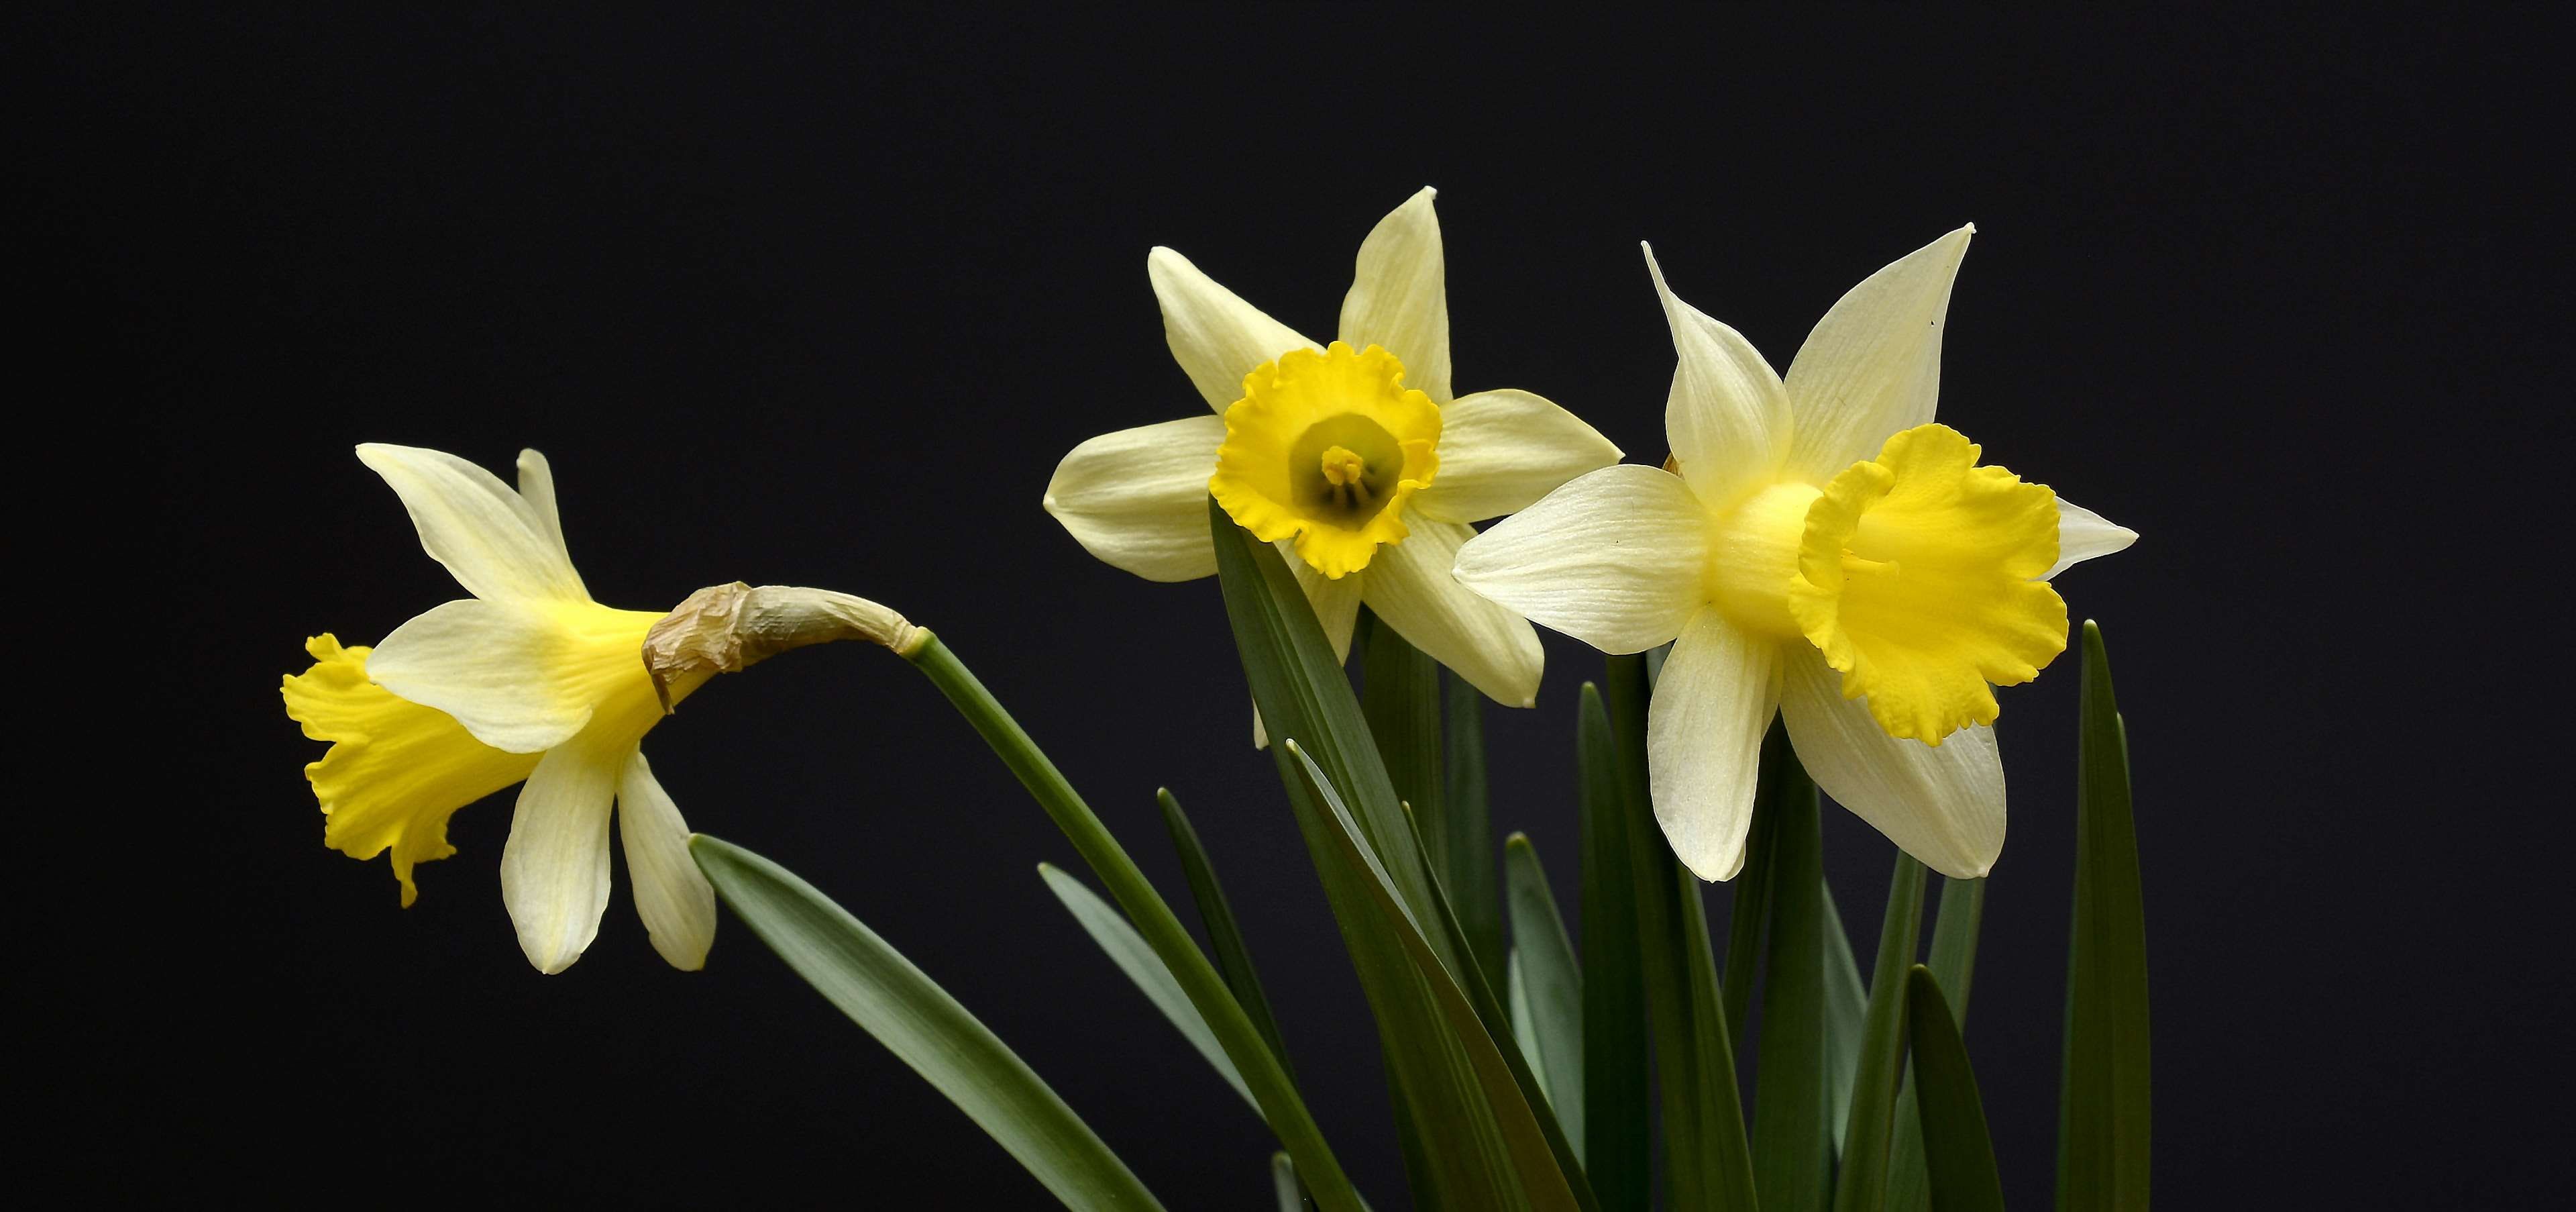 Daffodil, daffodils, flowers, harbinger of spring, narcissus